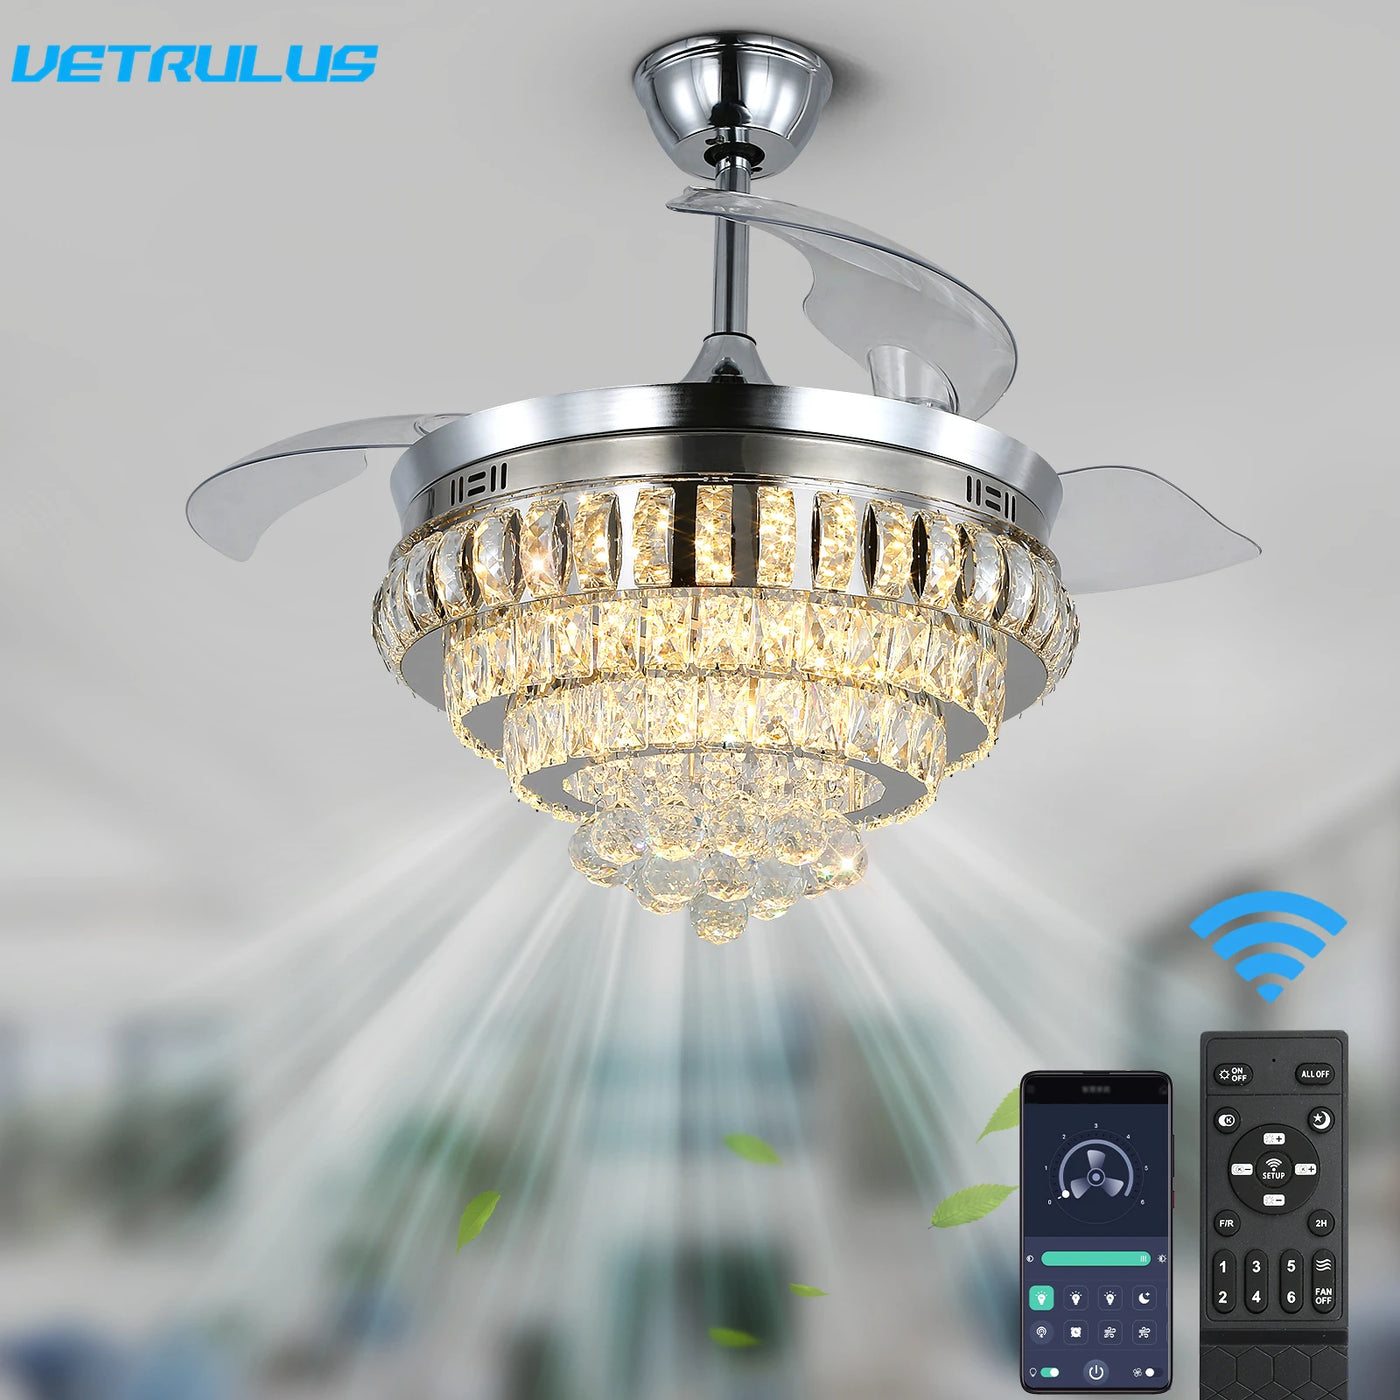 Modern Crystal Ceiling Fan with LED Light and Remote Control for Living and Dining Rooms with Intelligent BLDC Technology